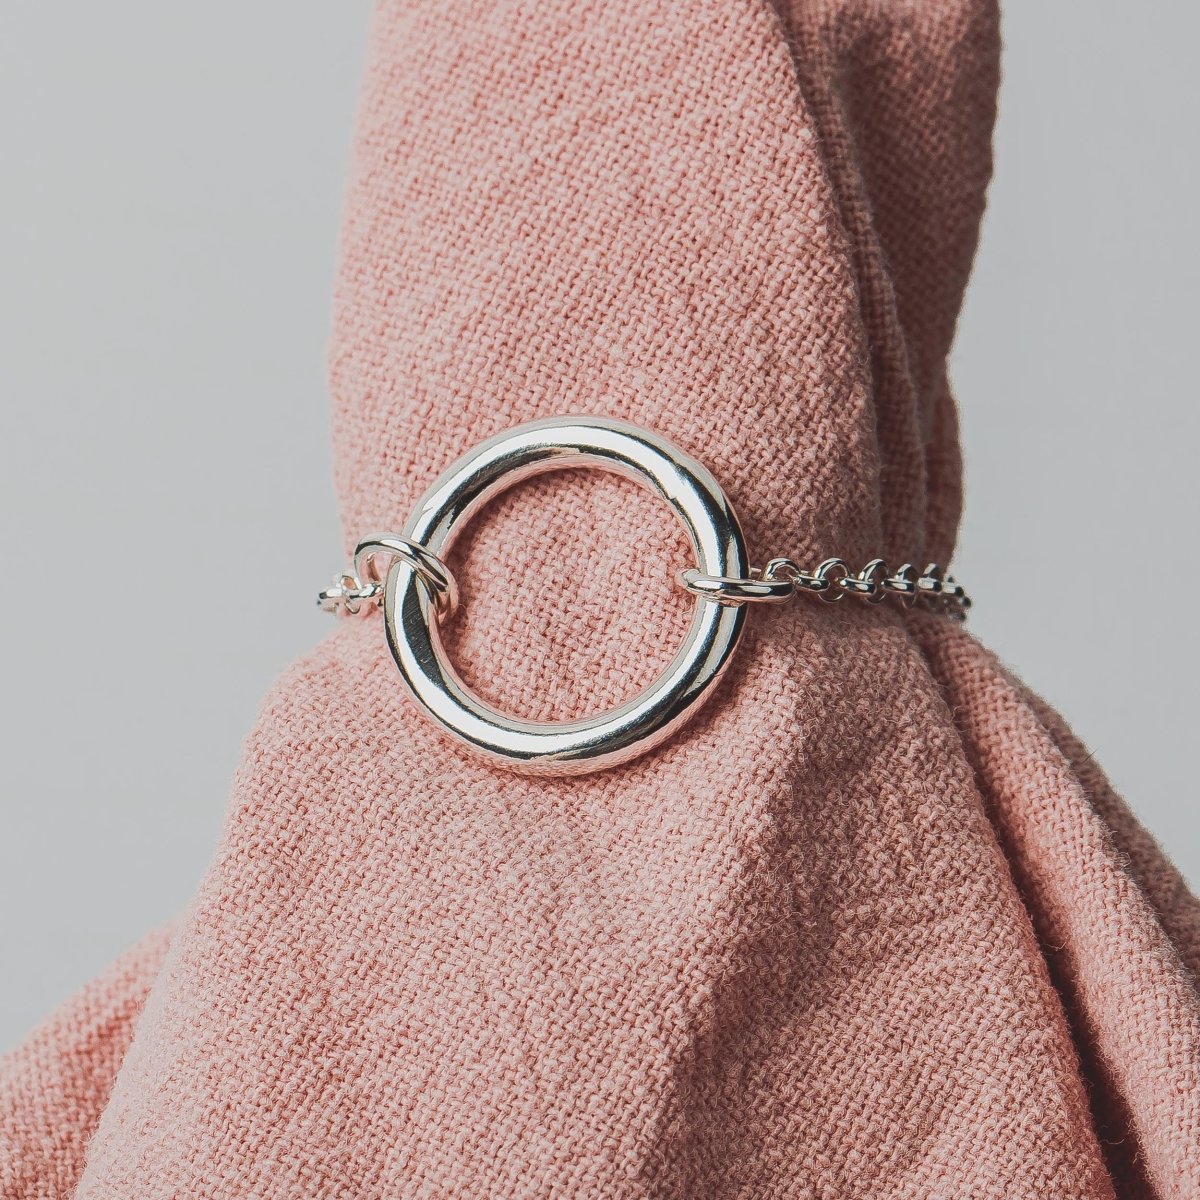 Forever Connected Chain Ring - Melanie Golden Jewelry - _badge_bestseller, bestseller, forever connected, ring, ring bands, rings